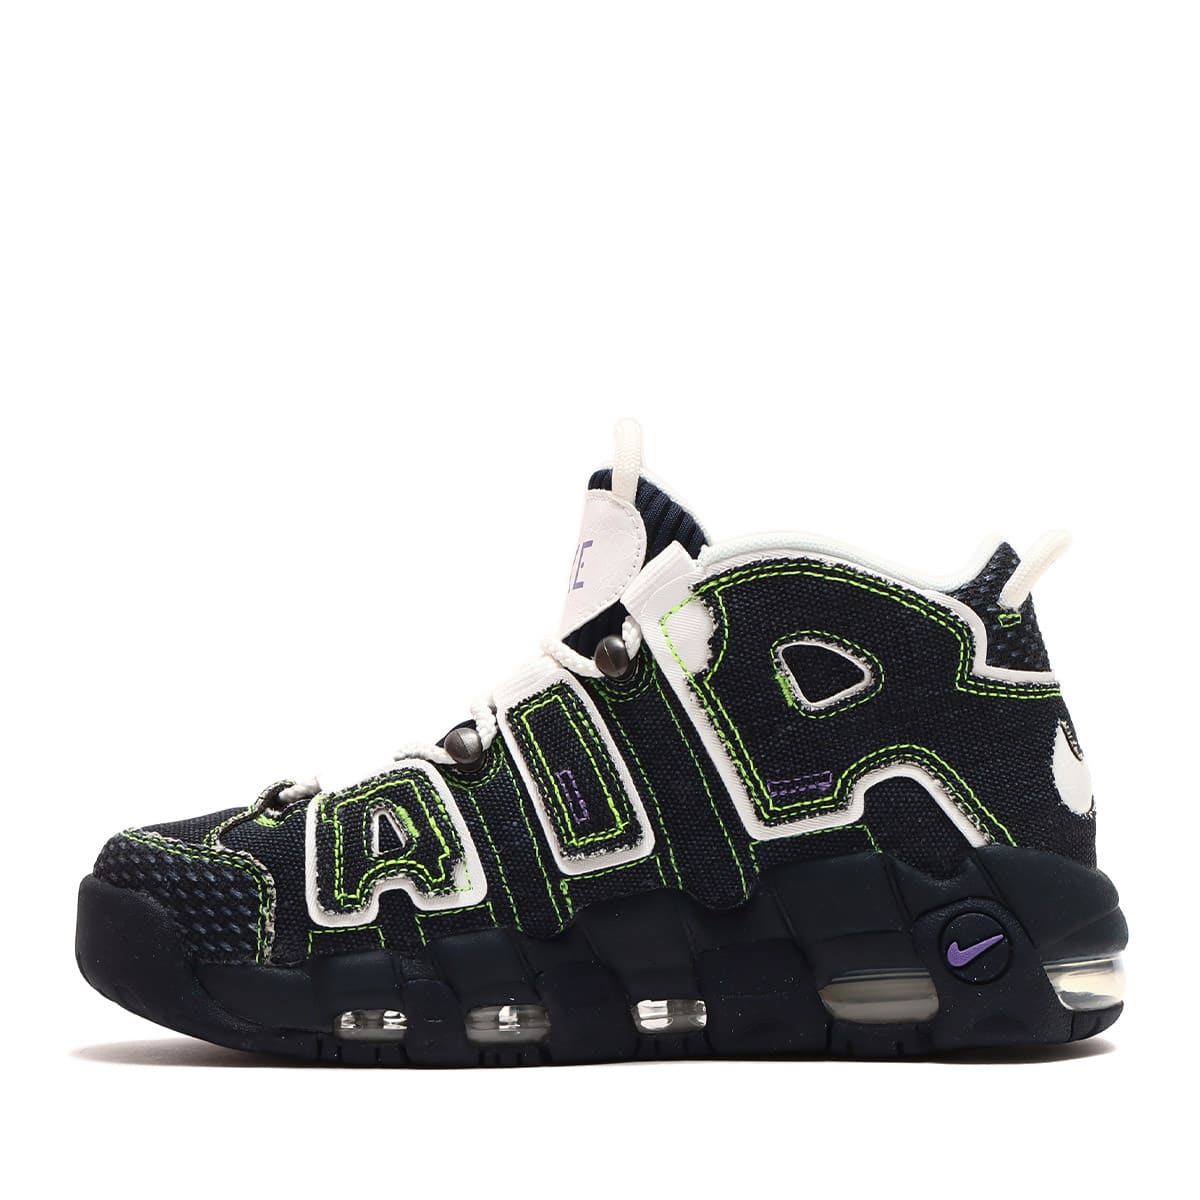 NIKE SWDC W AIR MORE UPTEMPO DARK OBSIDIAN/SUMMIT WHITE-SPACE